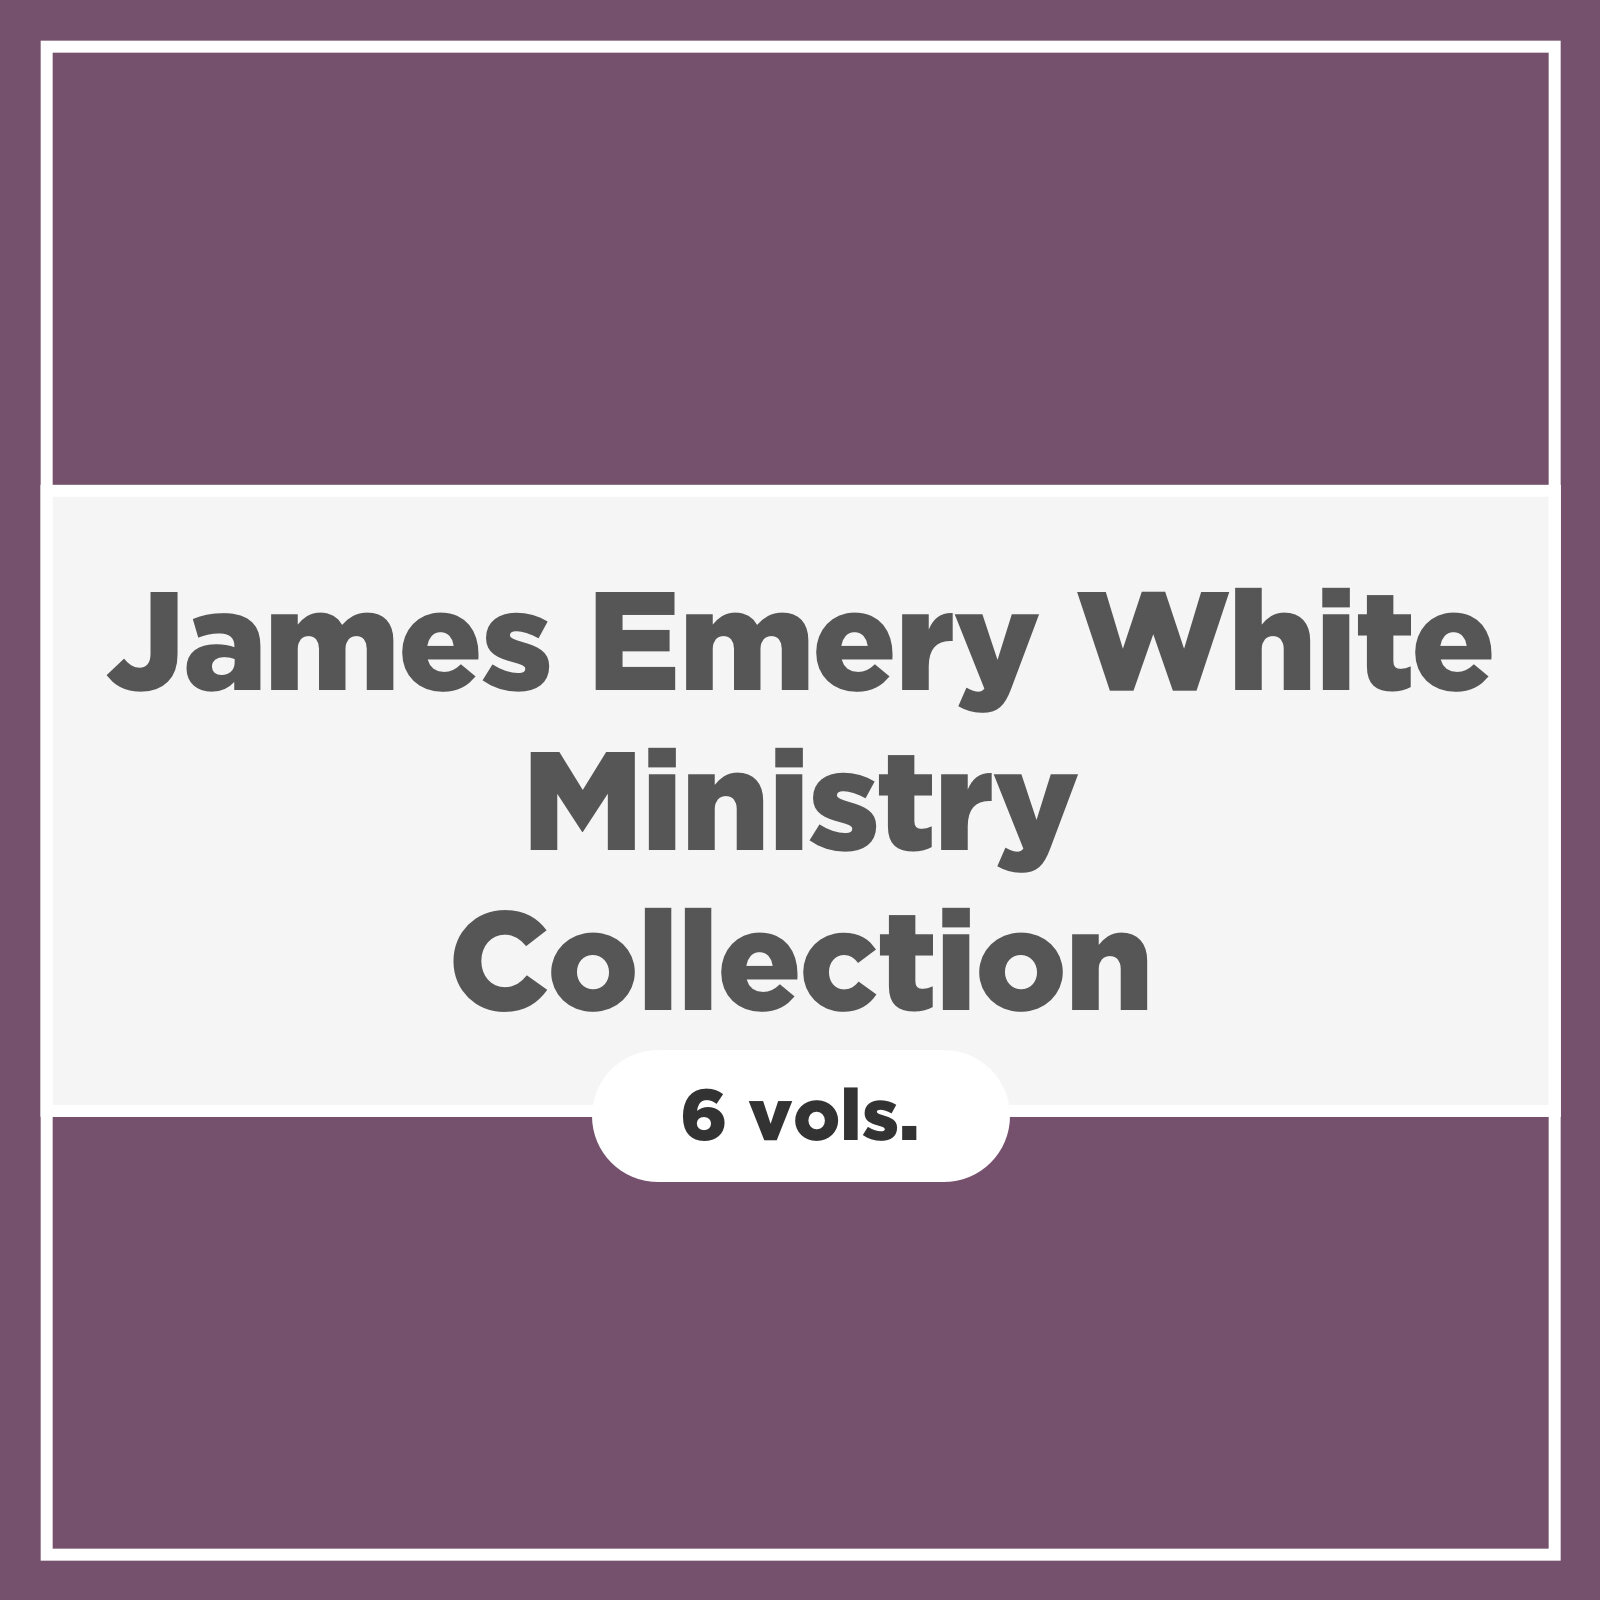 James Emery White Ministry Collection (6 vols.)